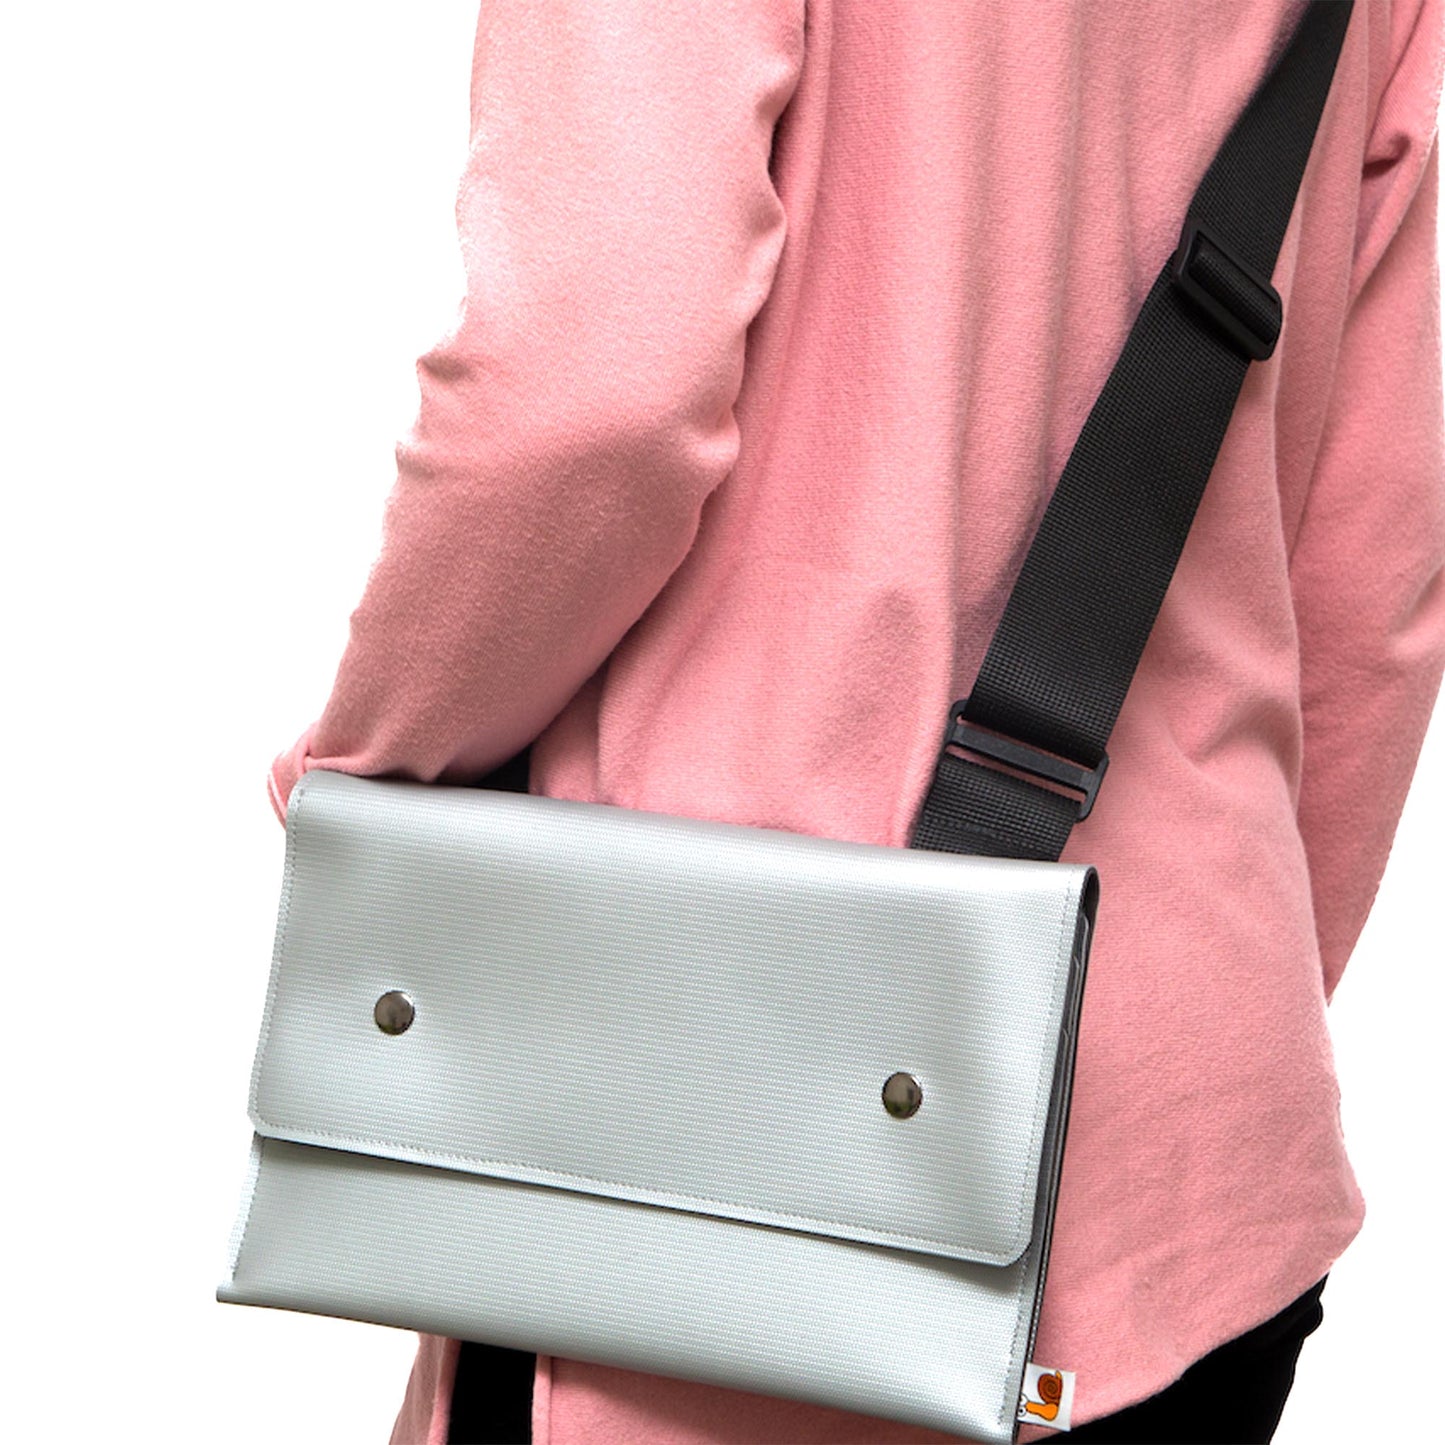 iPad Messenger Bag with Shoulder Strap - Silver Faux Leather